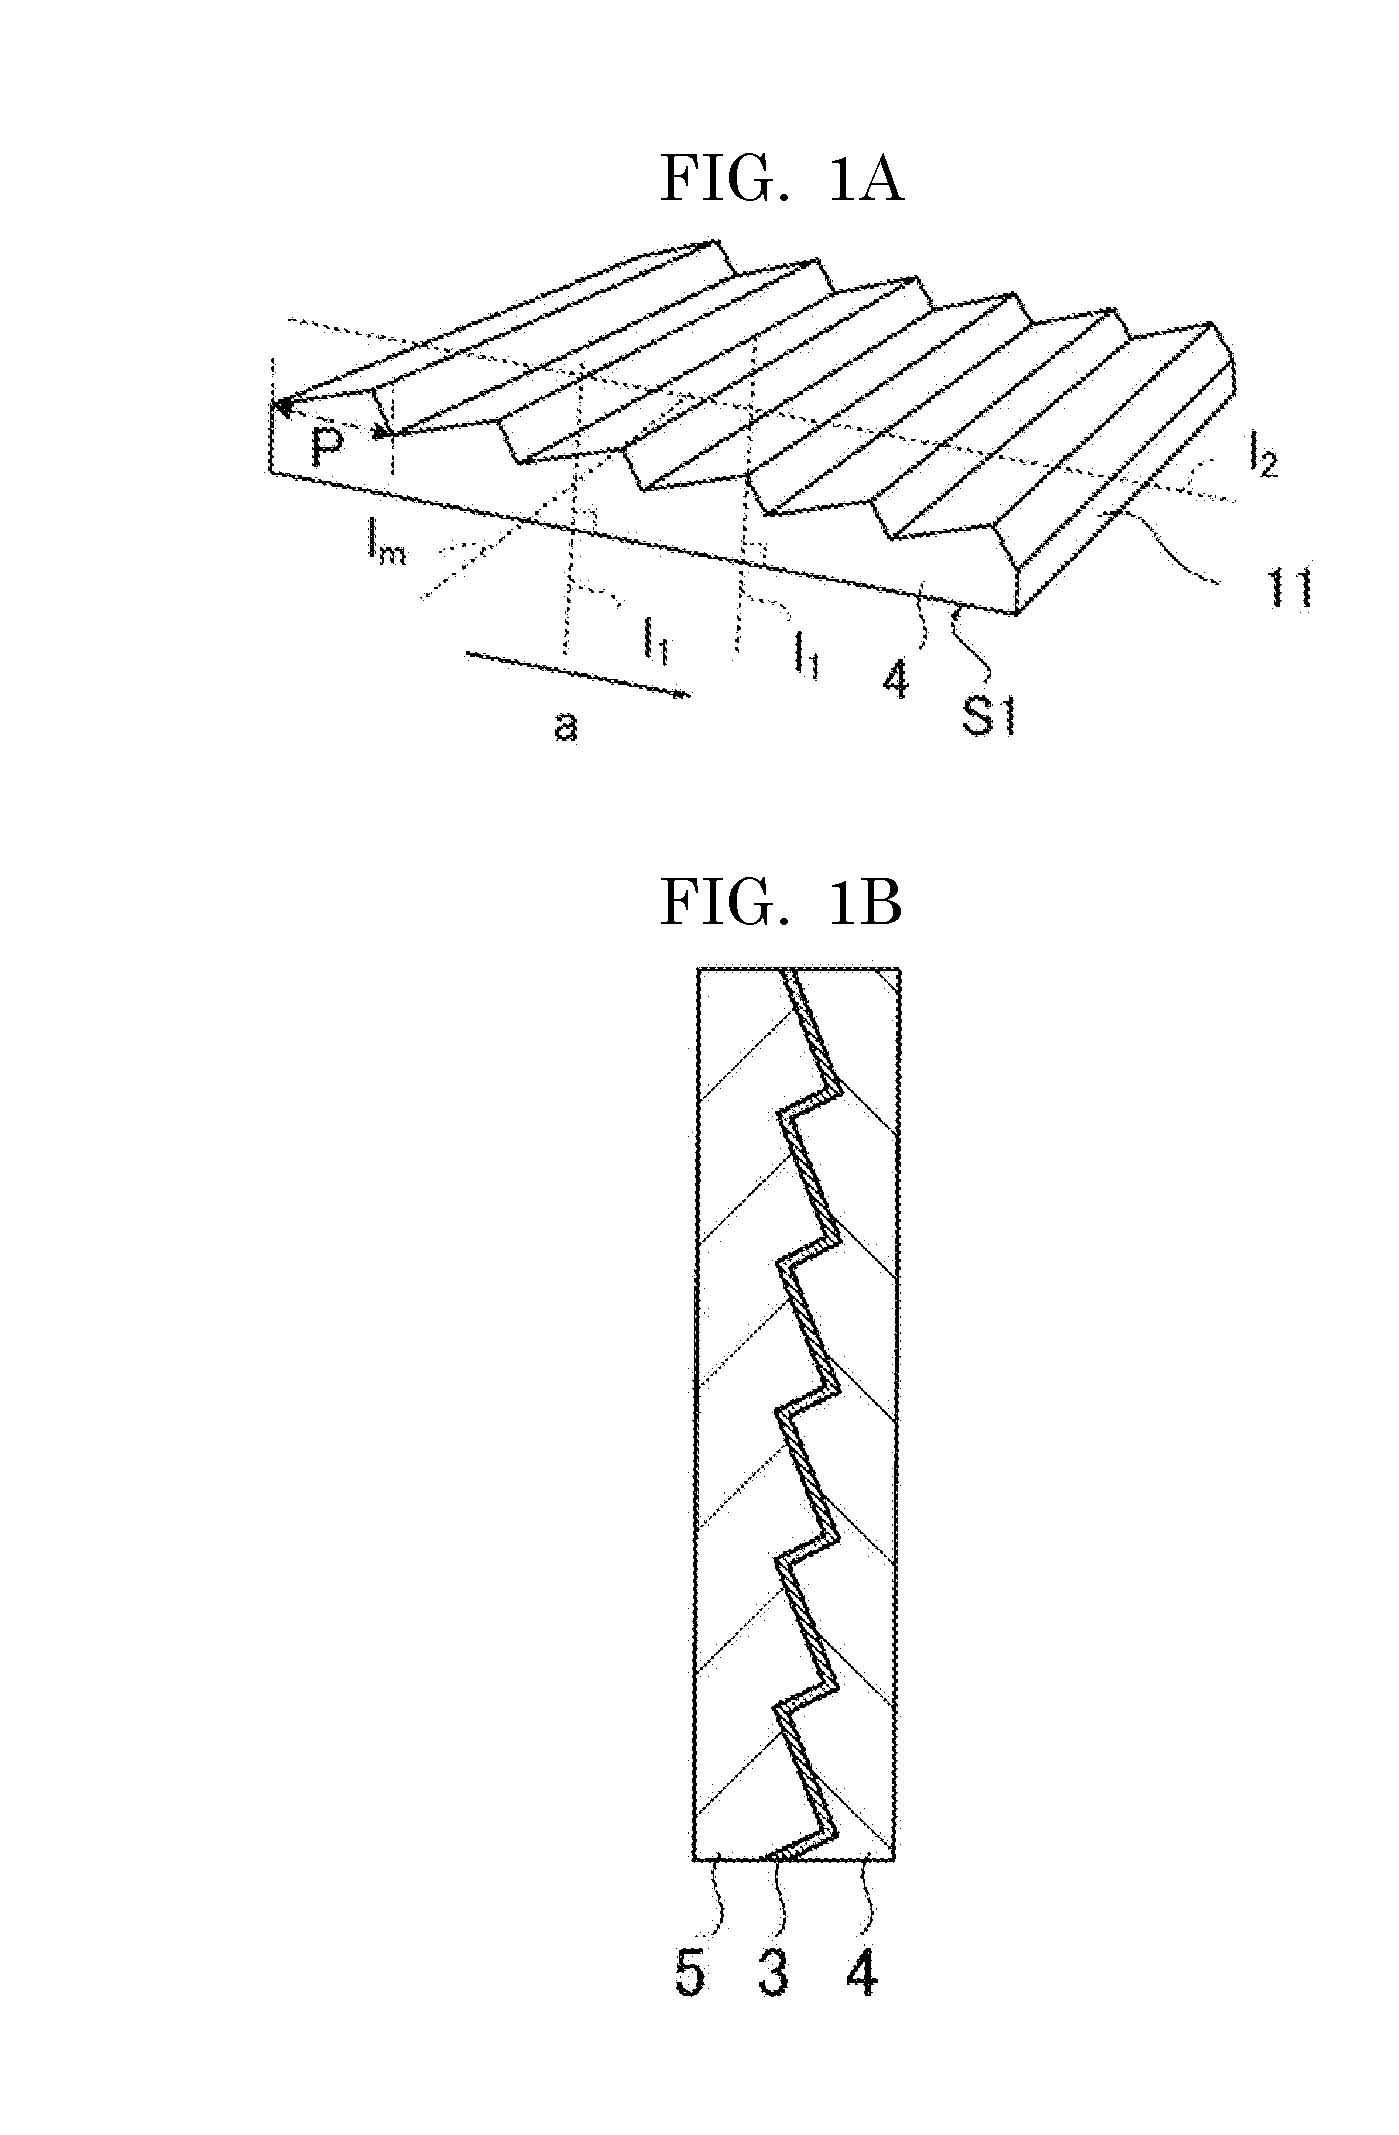 Optical member, production method therefor, window material, and fixture